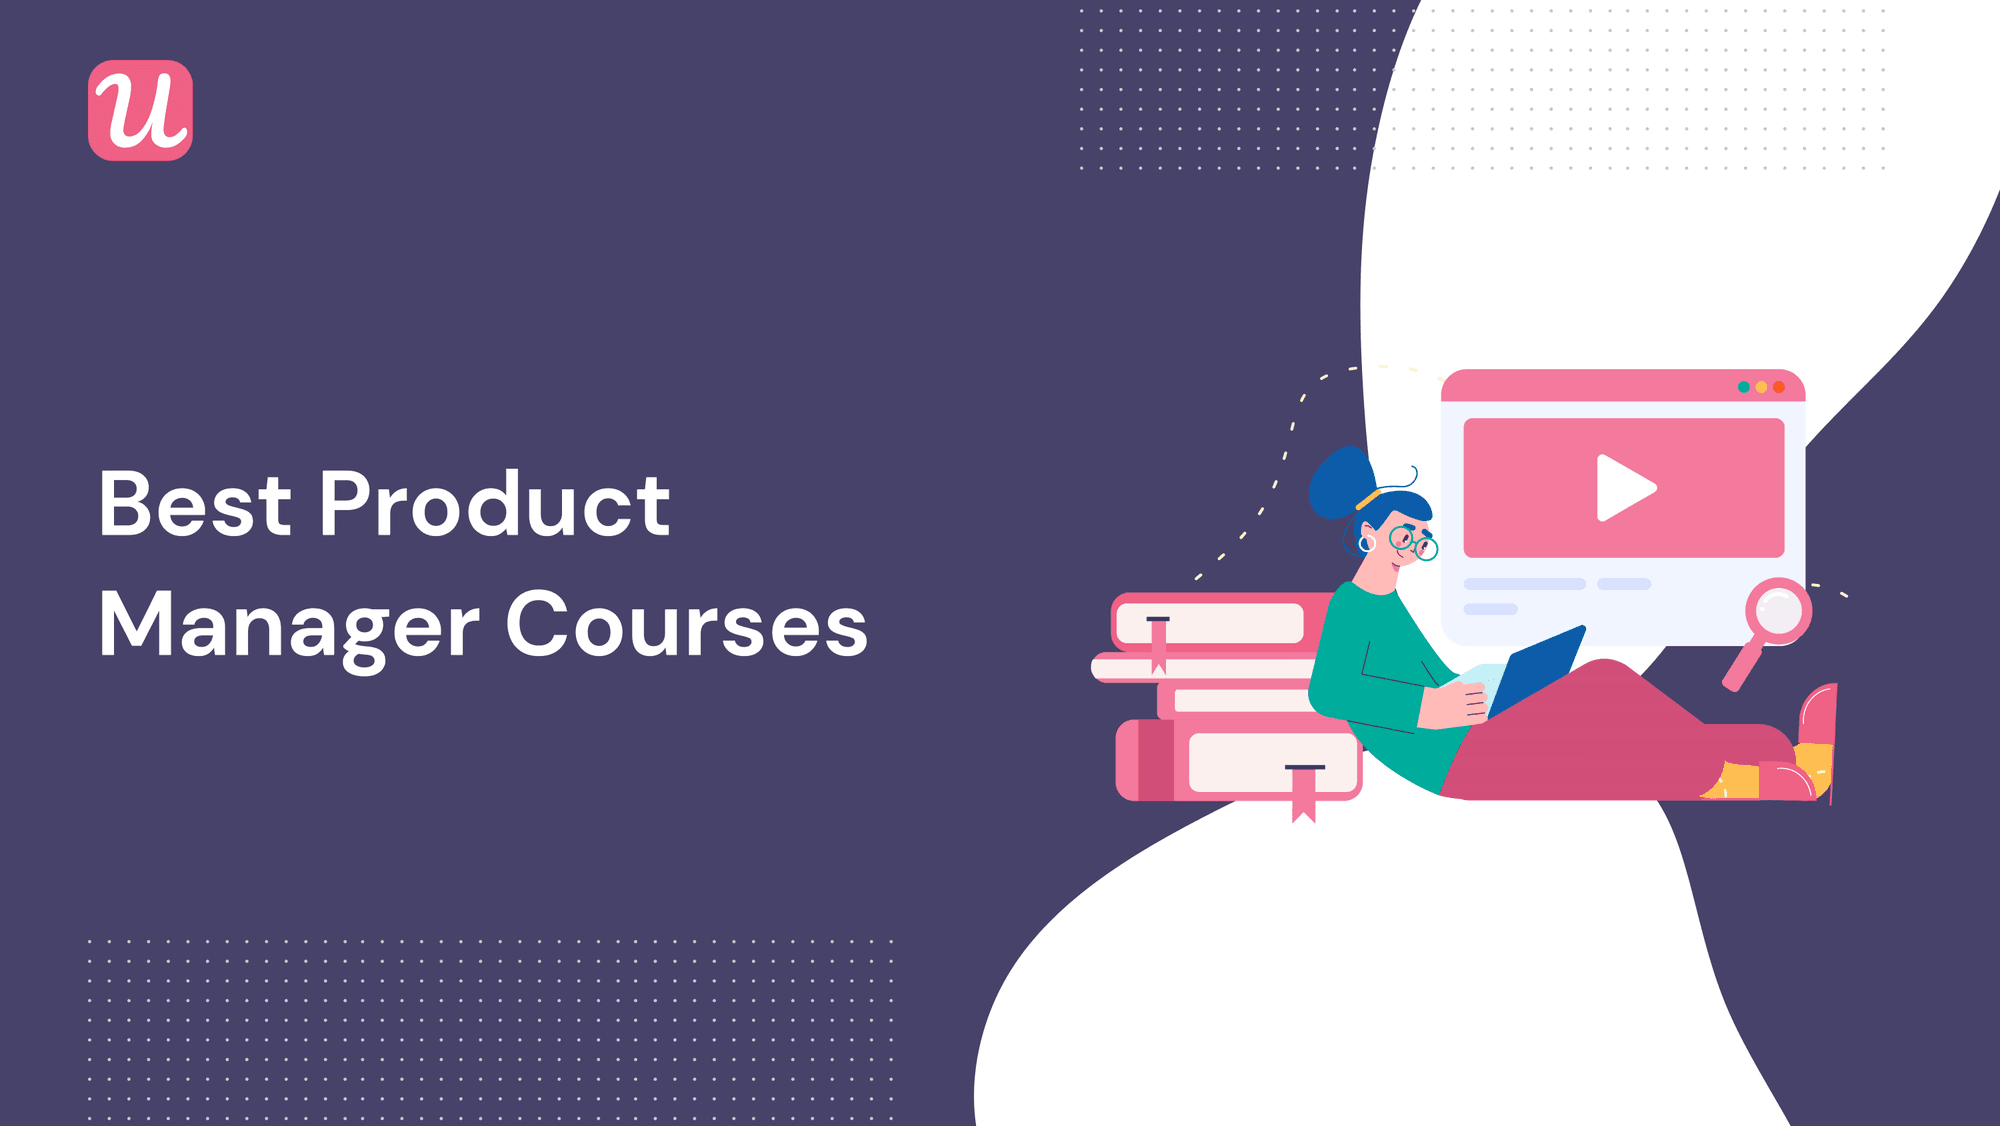 6 Best Product Manager Courses in 2021 - For All Proficiency Levels